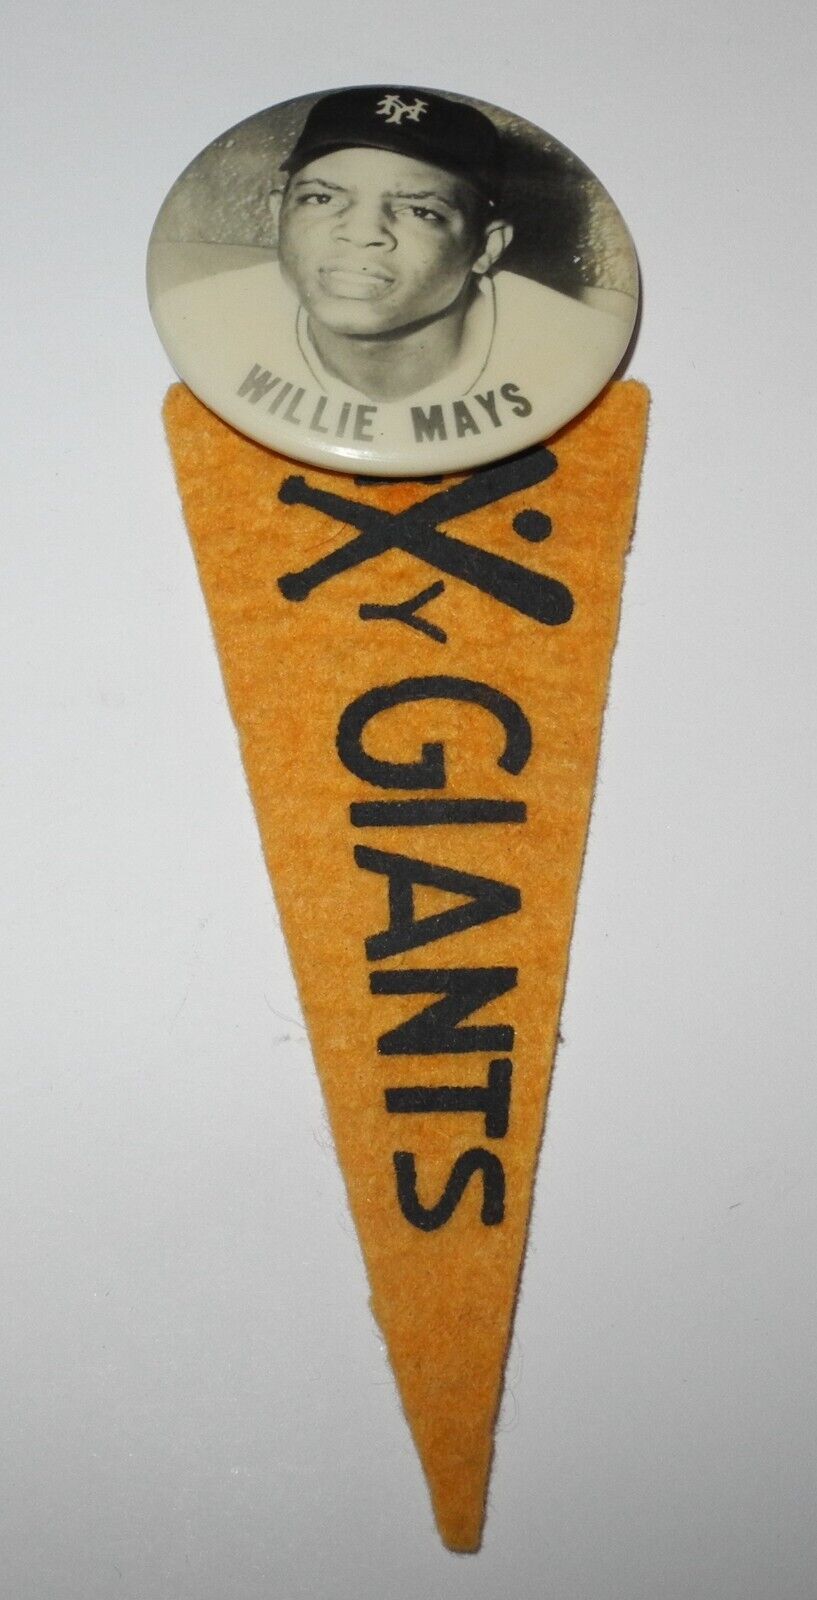 1954 Baseball Willie Mays New York Giants World Series Pin Button Coin Pennant